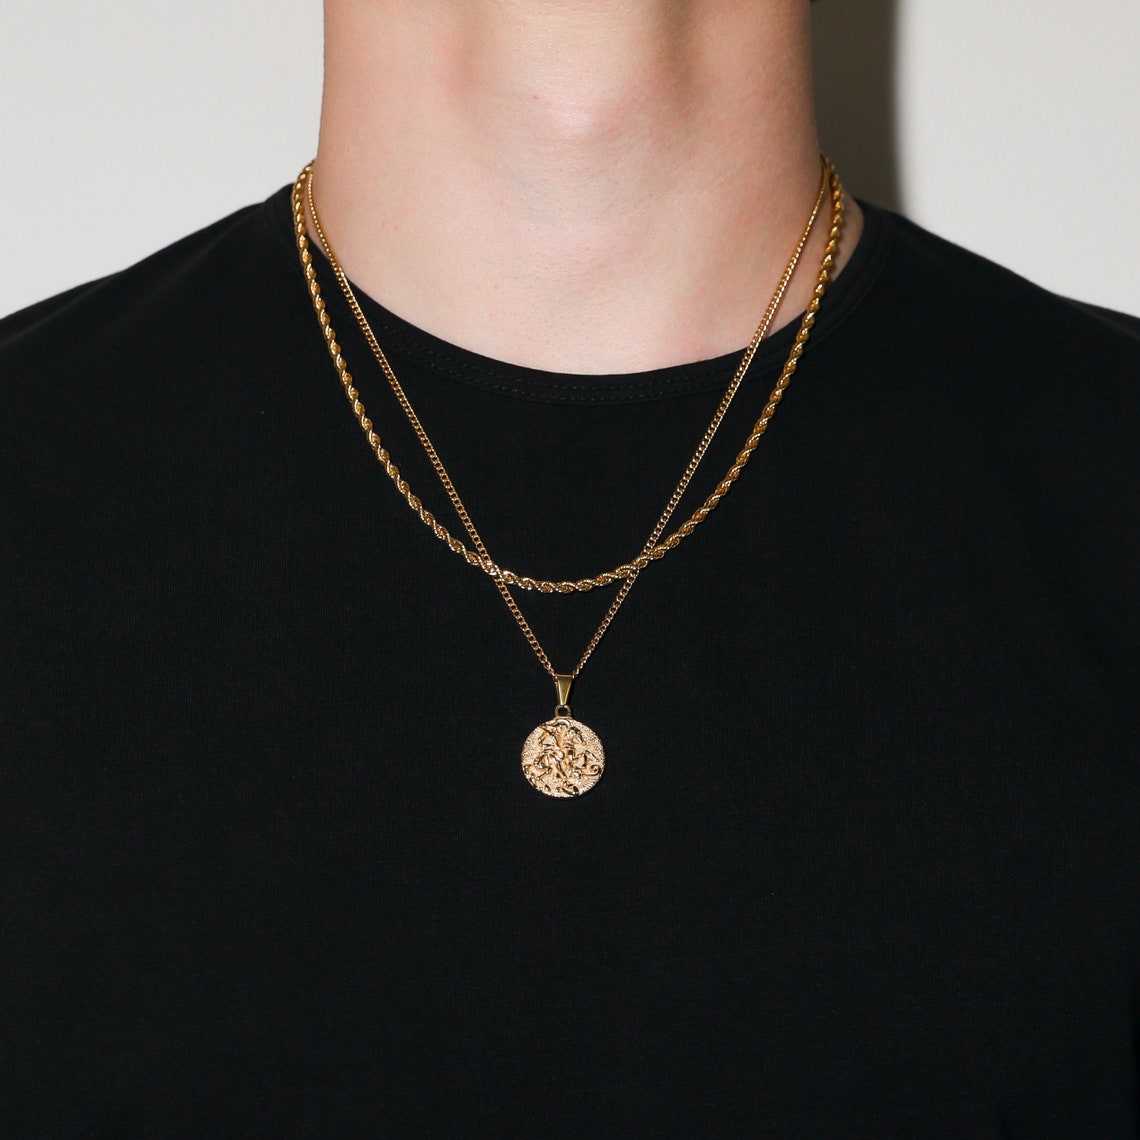 Necklace Set for Men 18k Gold St George Pendant Rope Chain - Etsy